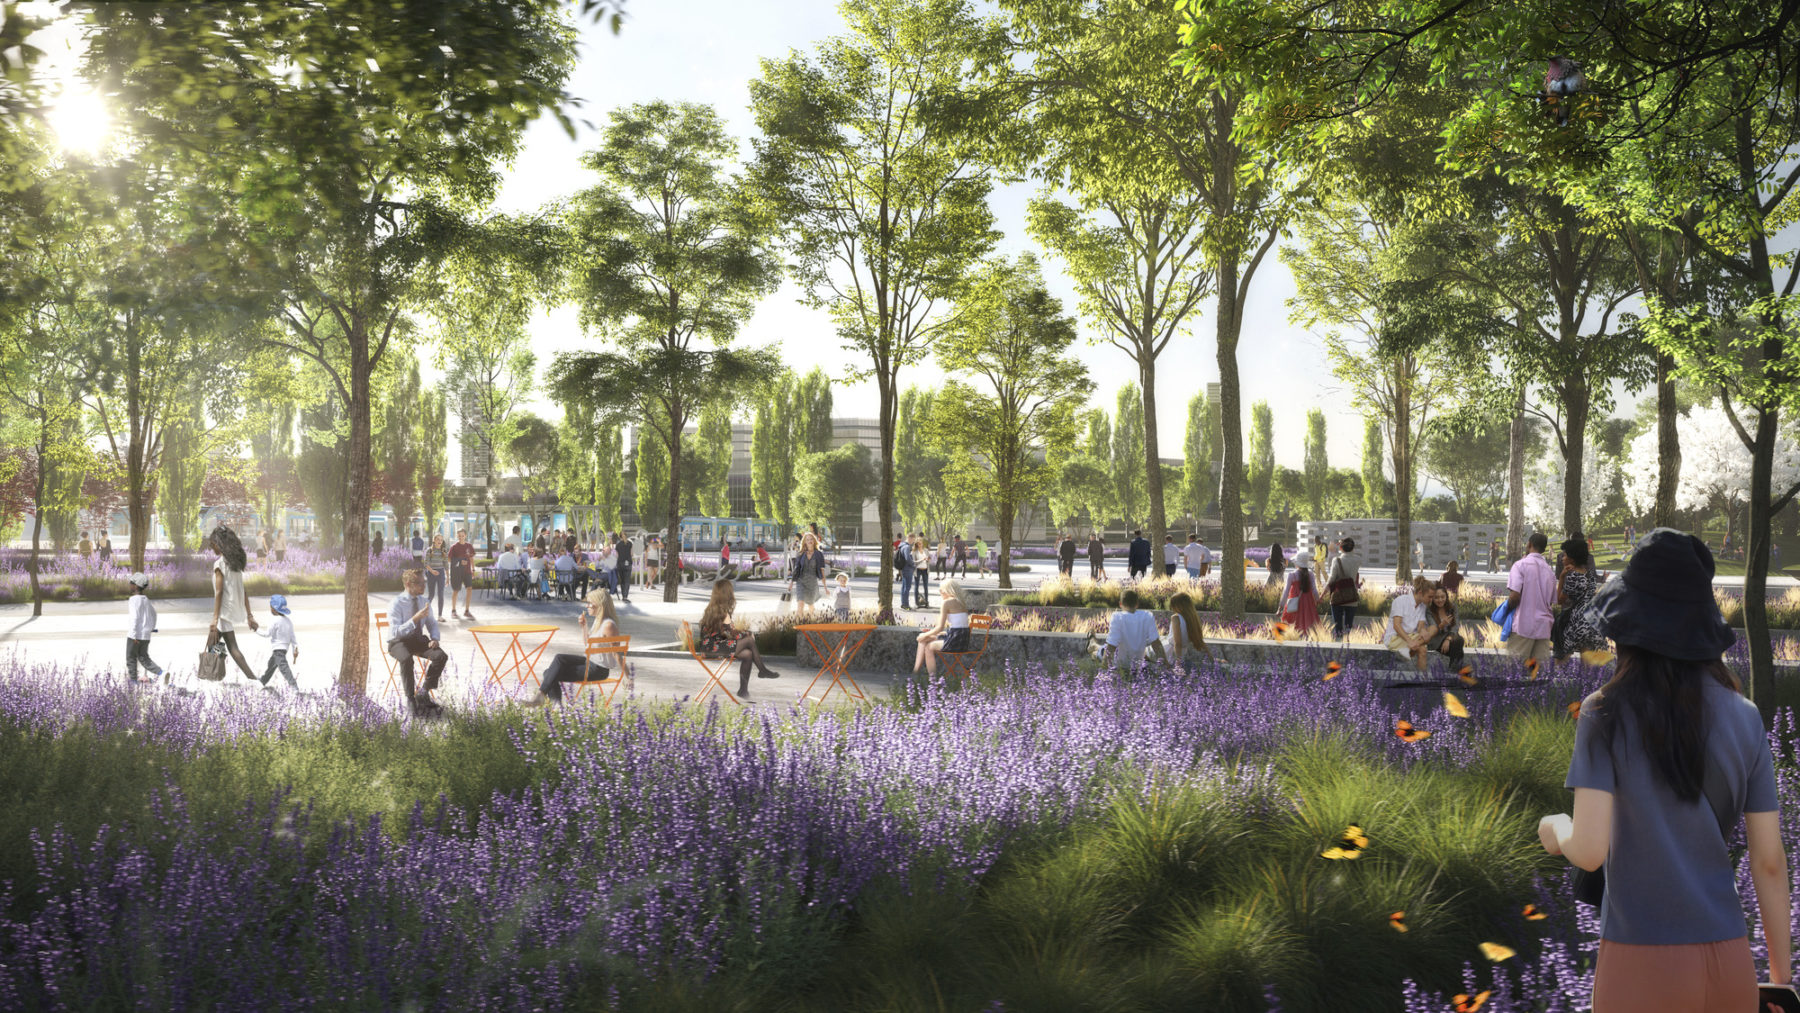 Rendering of plaza in proposed design. A woman surrounded by butterflies appears in the foreground and people sitting at orange cafe tables and along seat walls in the background.